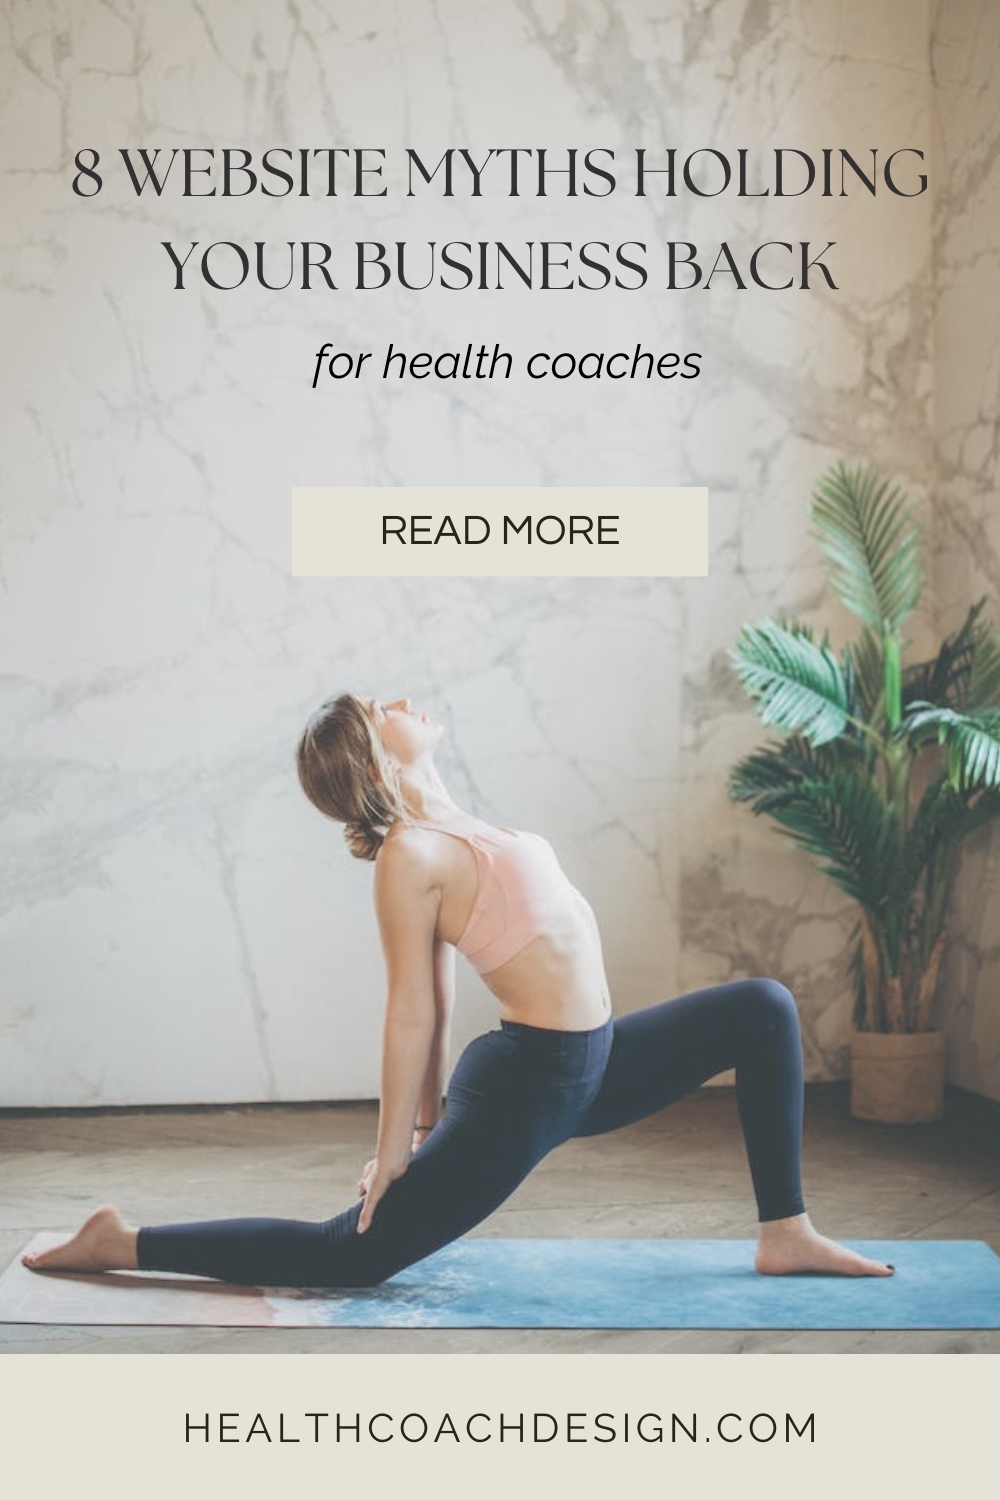 Pinterest pin for blog post titled "8 Website Myths Holding Your Health Coach Business Back." Woman is wearing athletic clothes stretching on a fitness mat.